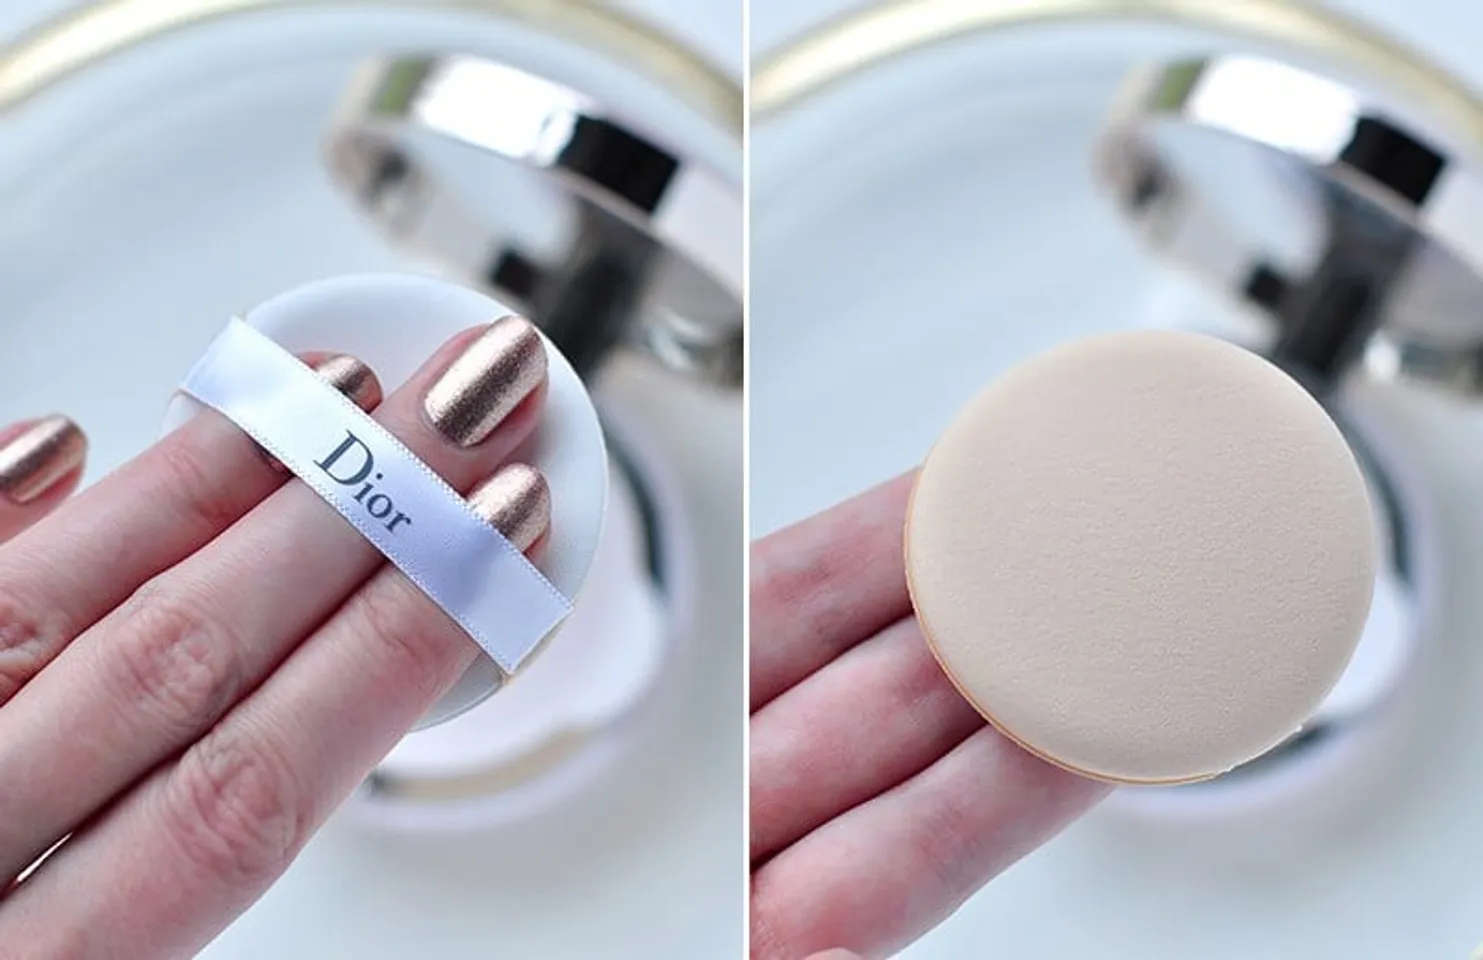 CHRISTIAN DIOR CAPTURE TOTALE DREAMSKIN PERFECT SKIN CUSHION SPF 50 WITH  EXTRA REFILL   025 2X15G05OZ trang điểm việt nam Makeup Vietnam